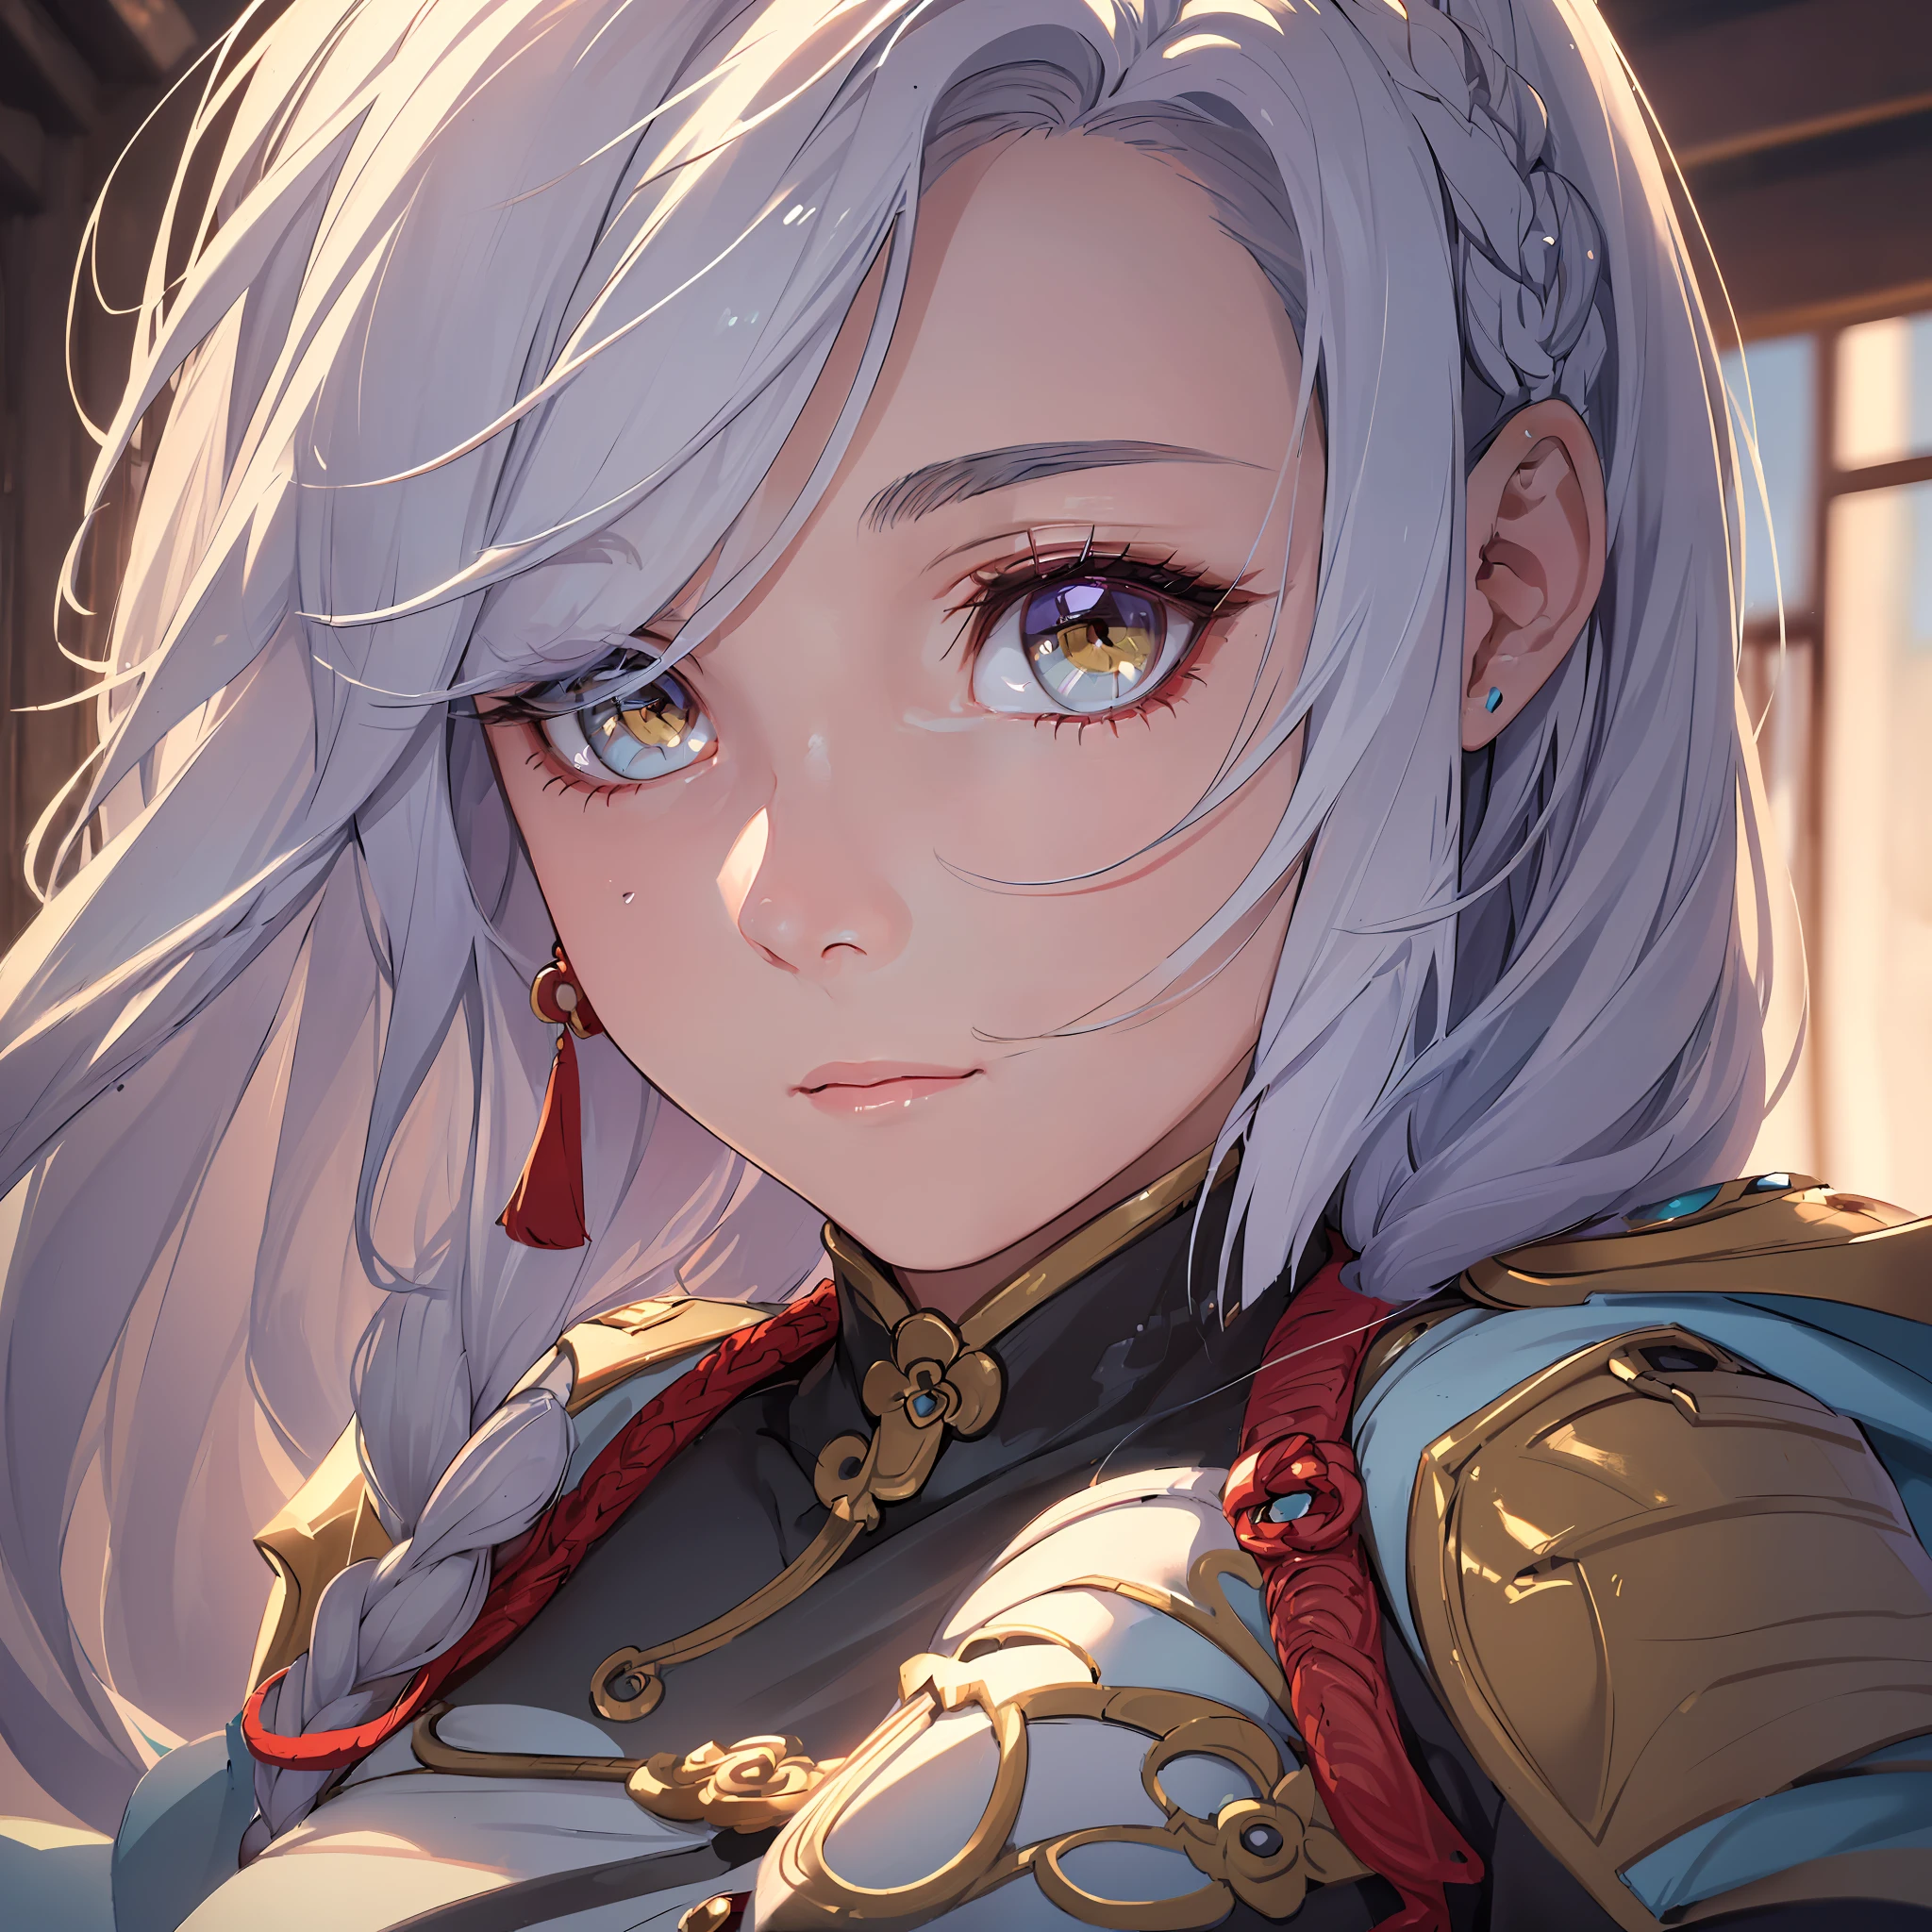 "(Shenhe in close-up, eye details and reflection, masterpiece, best quality, ultra-detailed, illustration, close-up portrait, 1 girl, with extremely detailed face and eyes, colored hair, yellow eyes, strong expression, high resolution, soft lighting)"